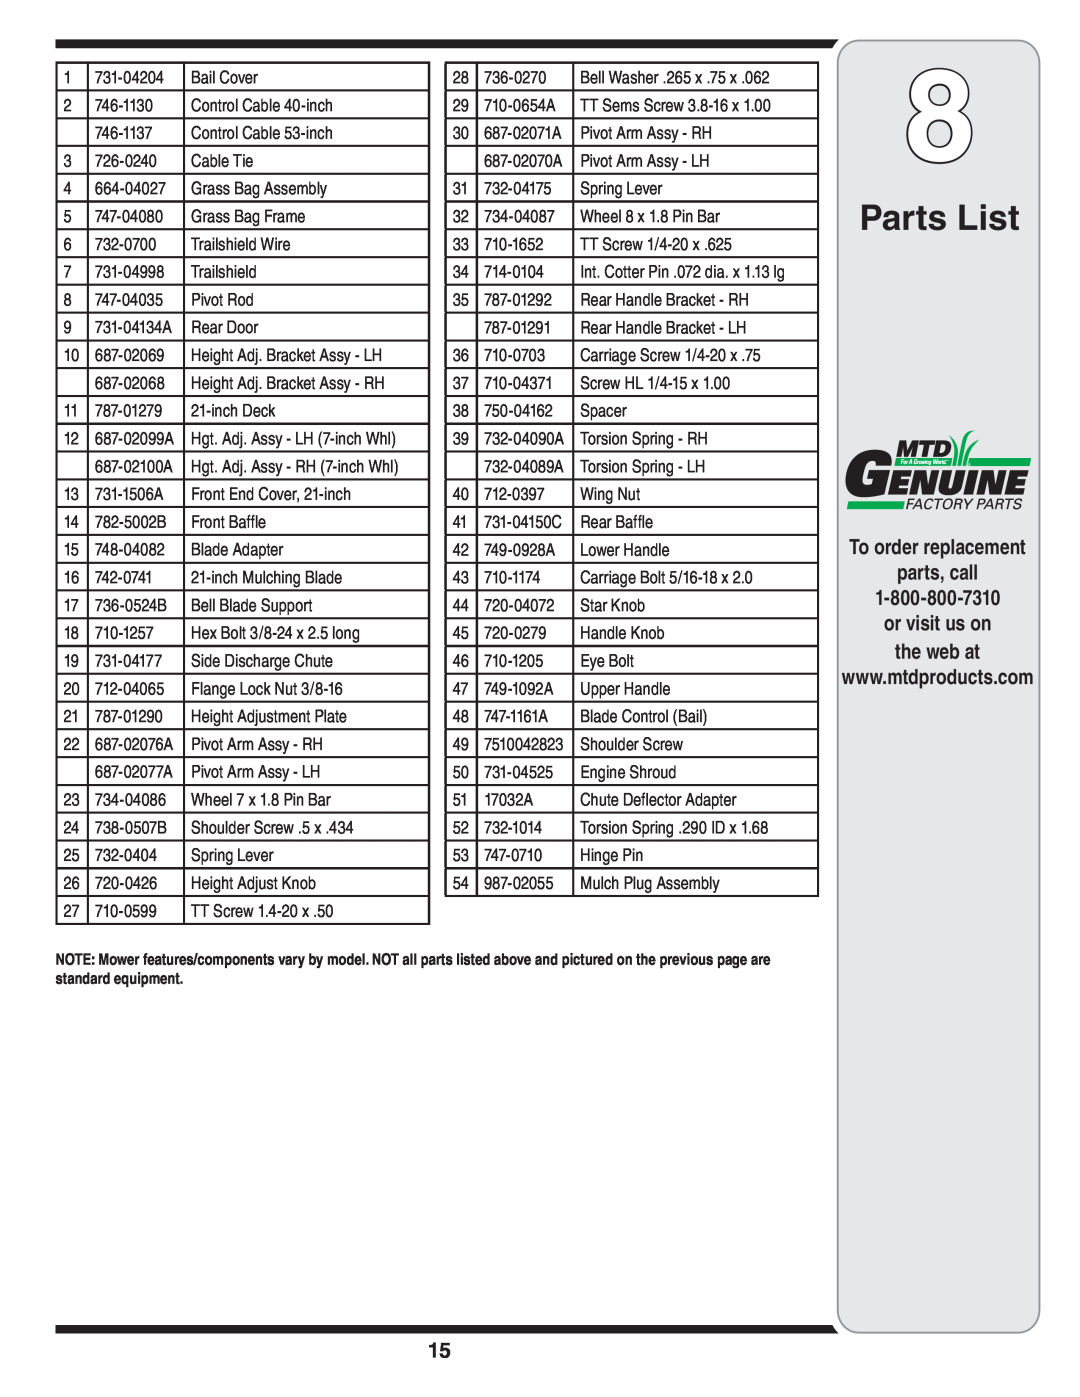 MTD Series 430 warranty Parts List, To order replacement parts, call, or visit us on the web at 